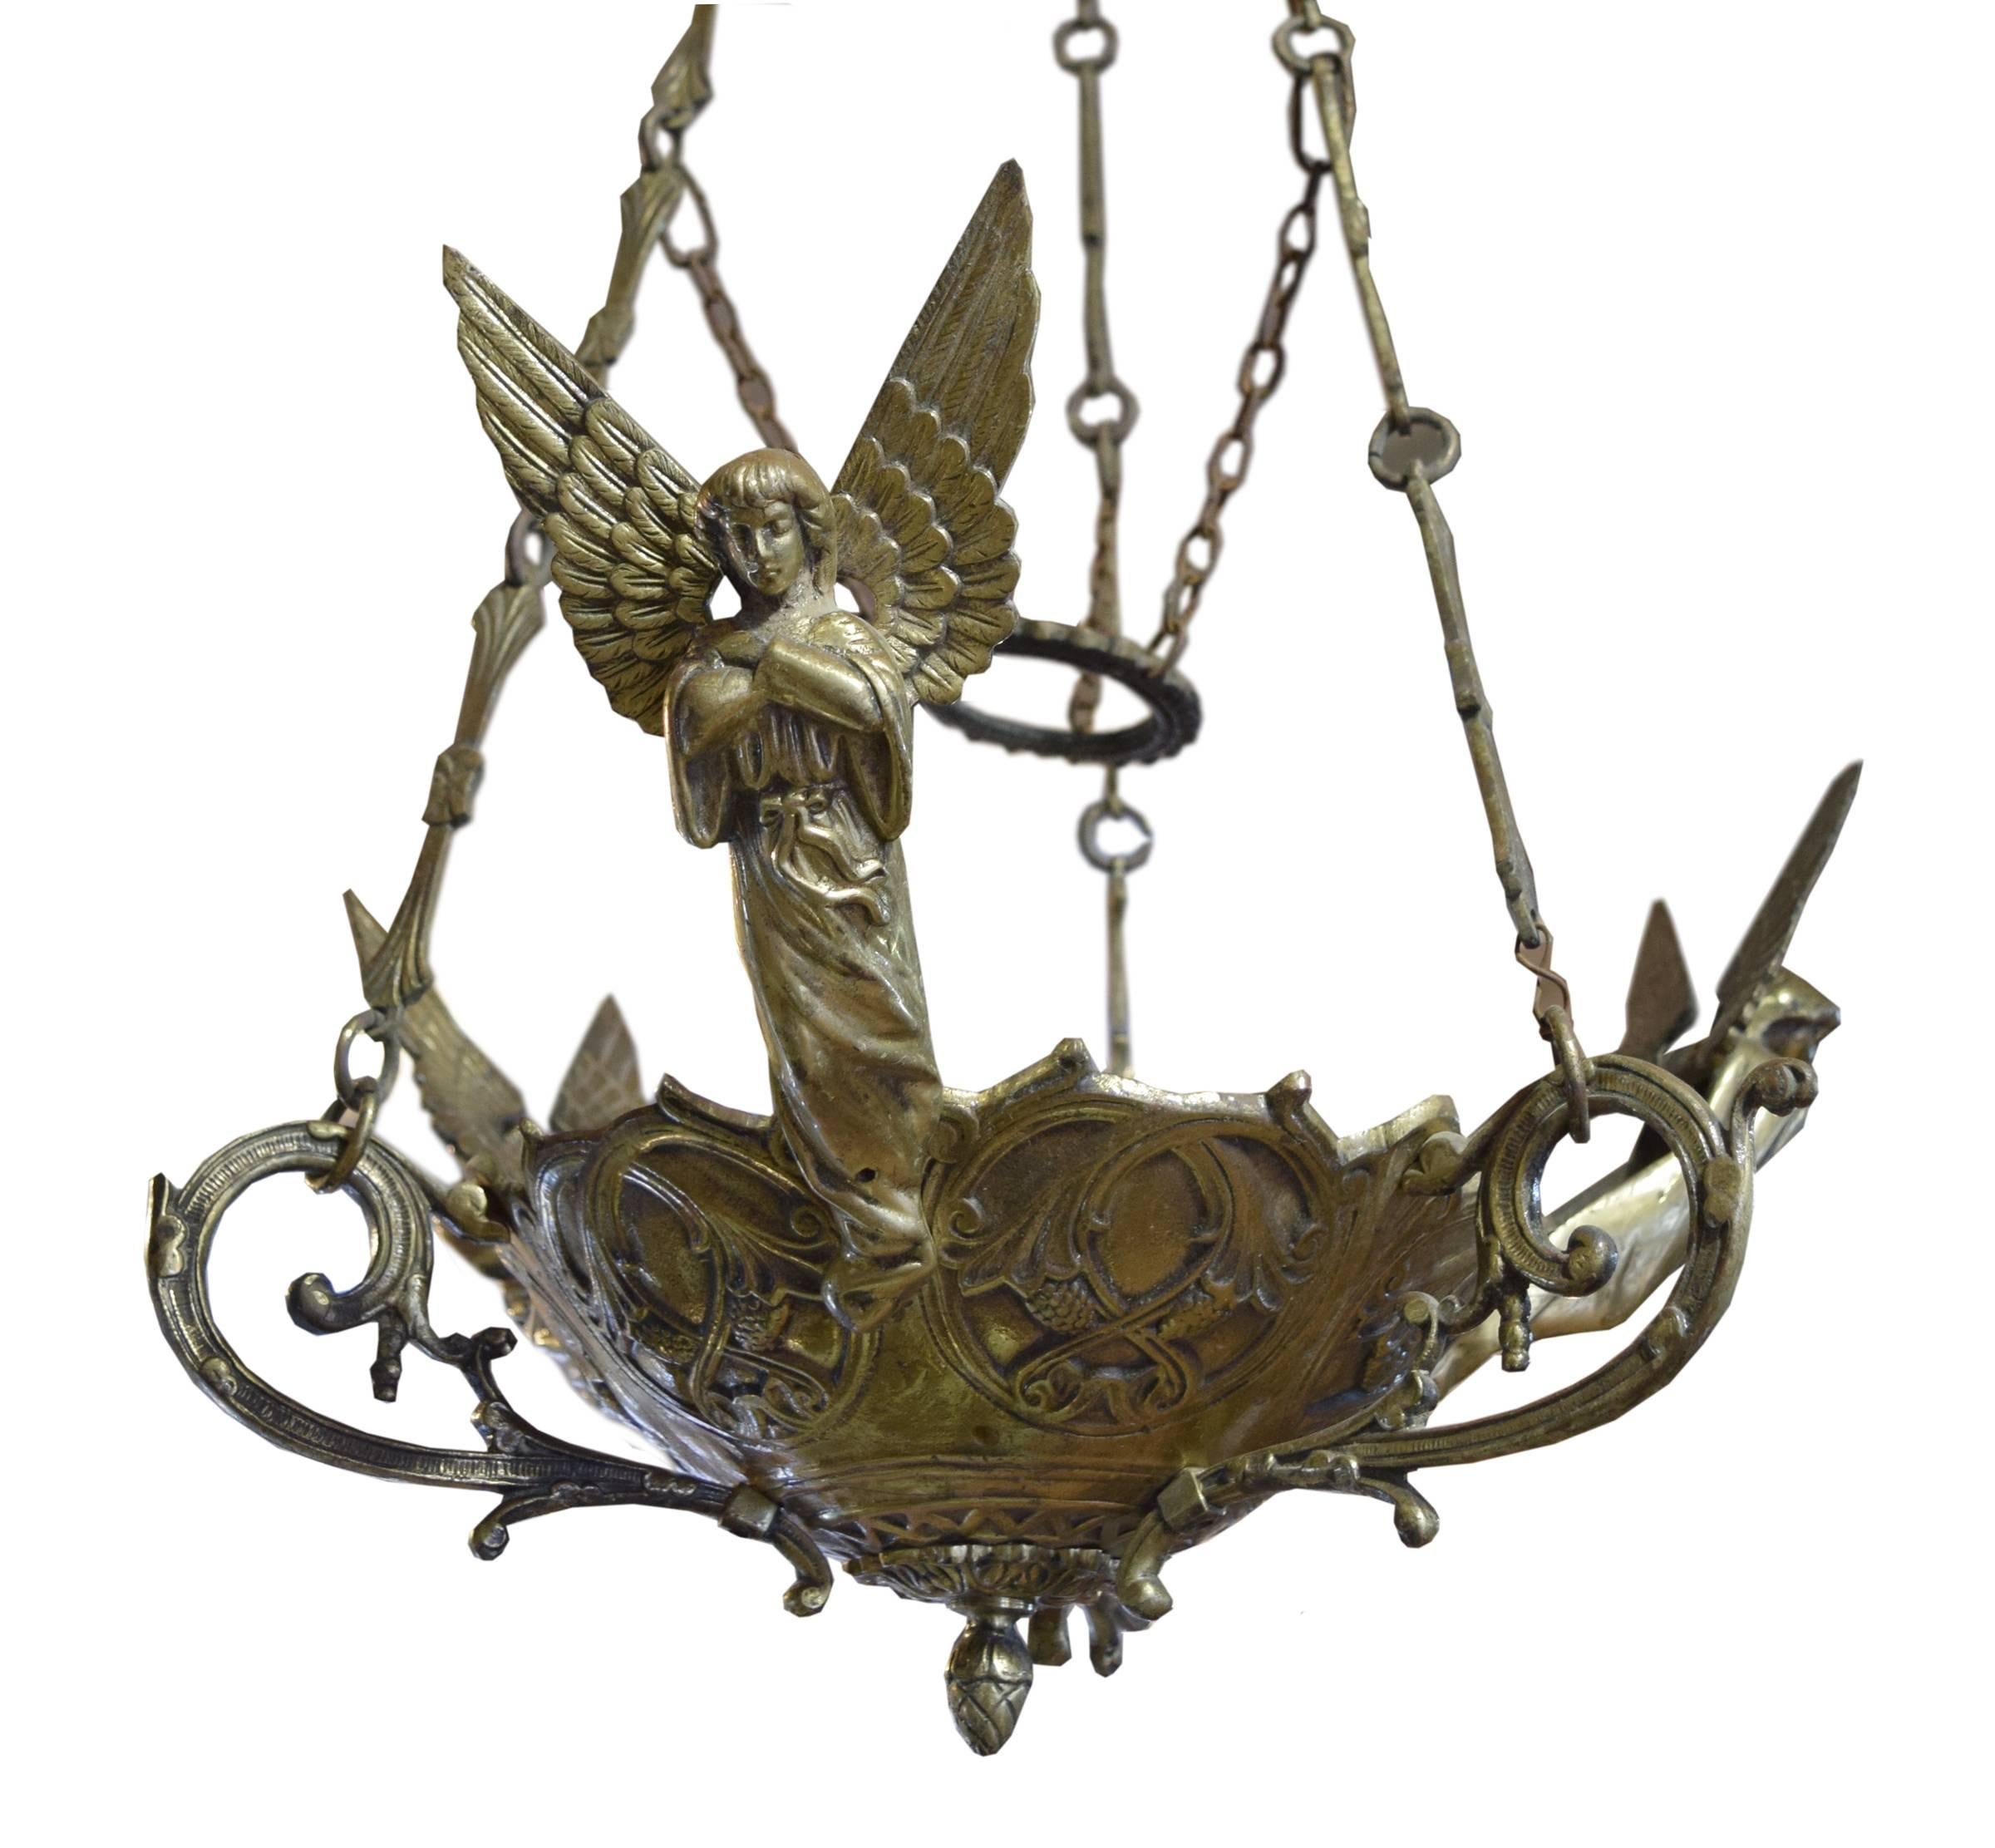 A bronze argentine hanging sanctuary lamp with a highly detailed cast bowl with three angels, circa 1900.